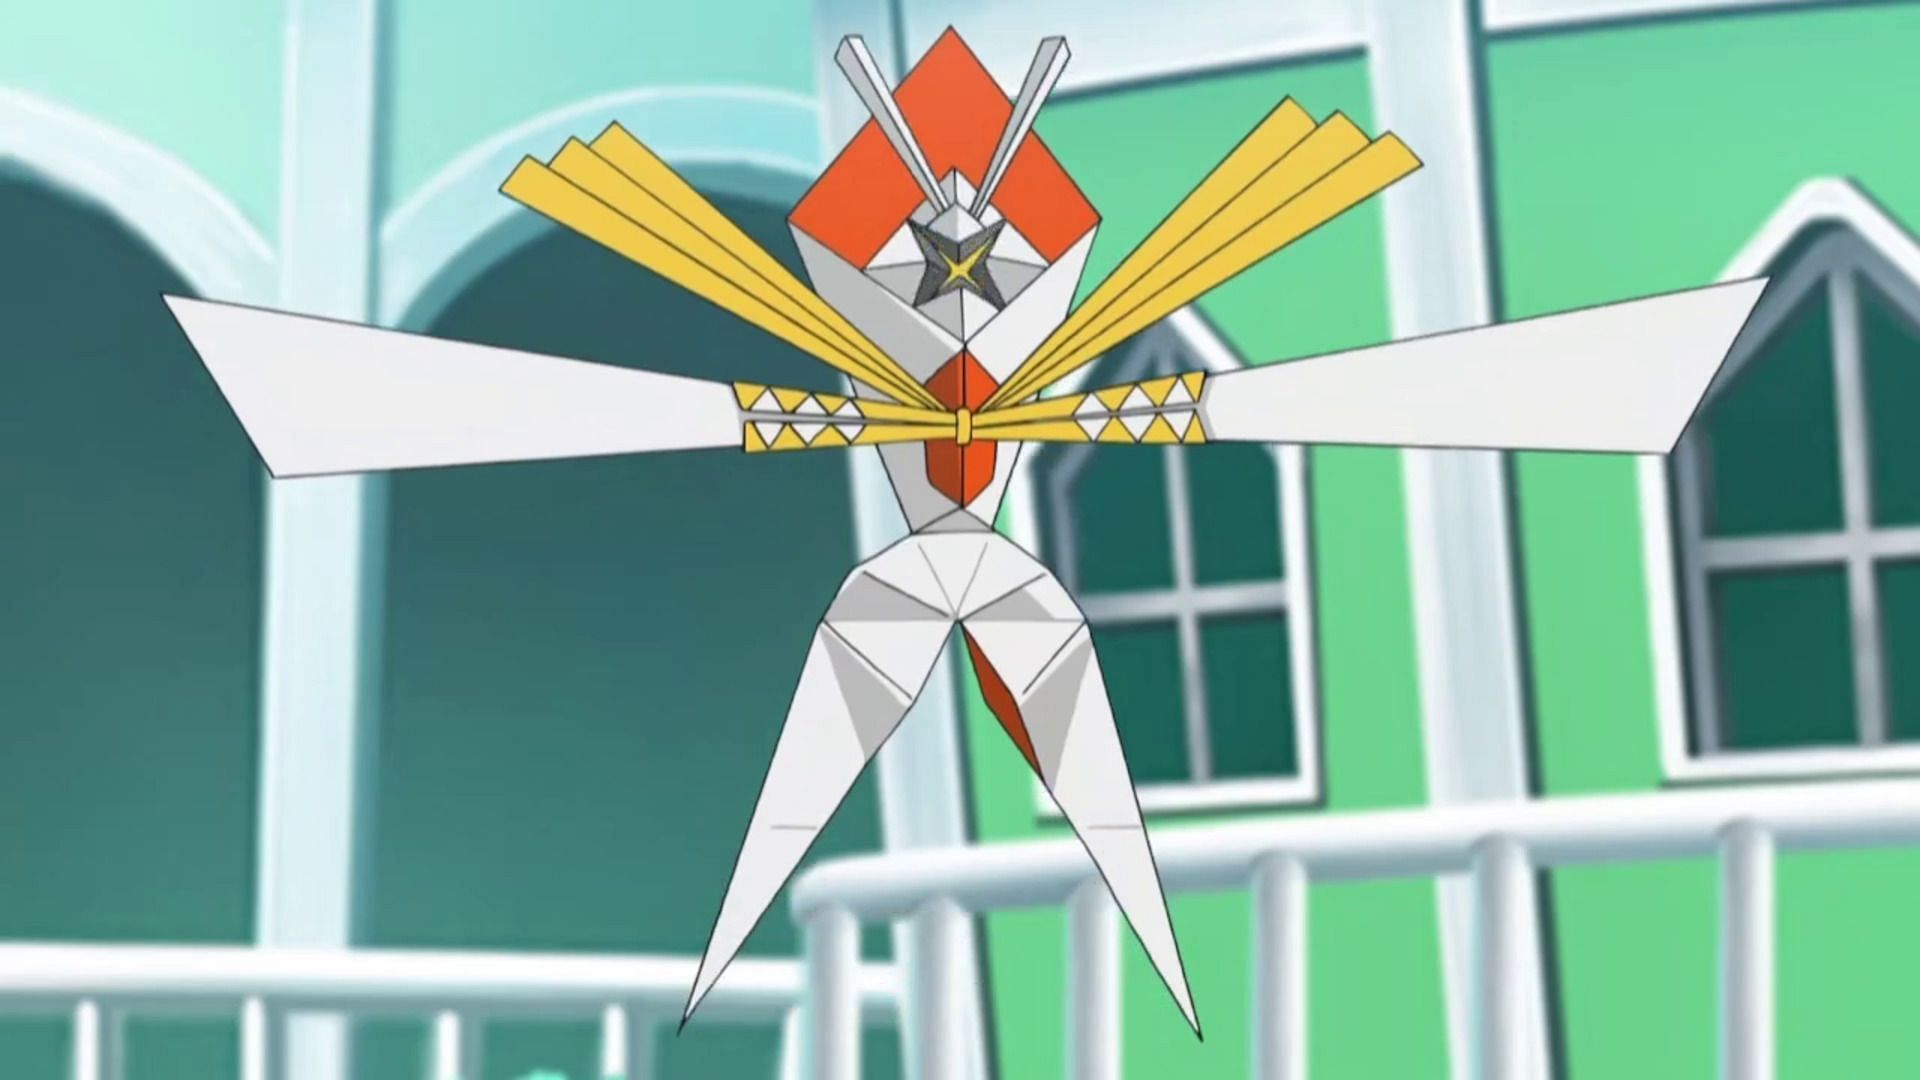 Pokemon GO Kartana guide: Best counters, weaknesses, and more